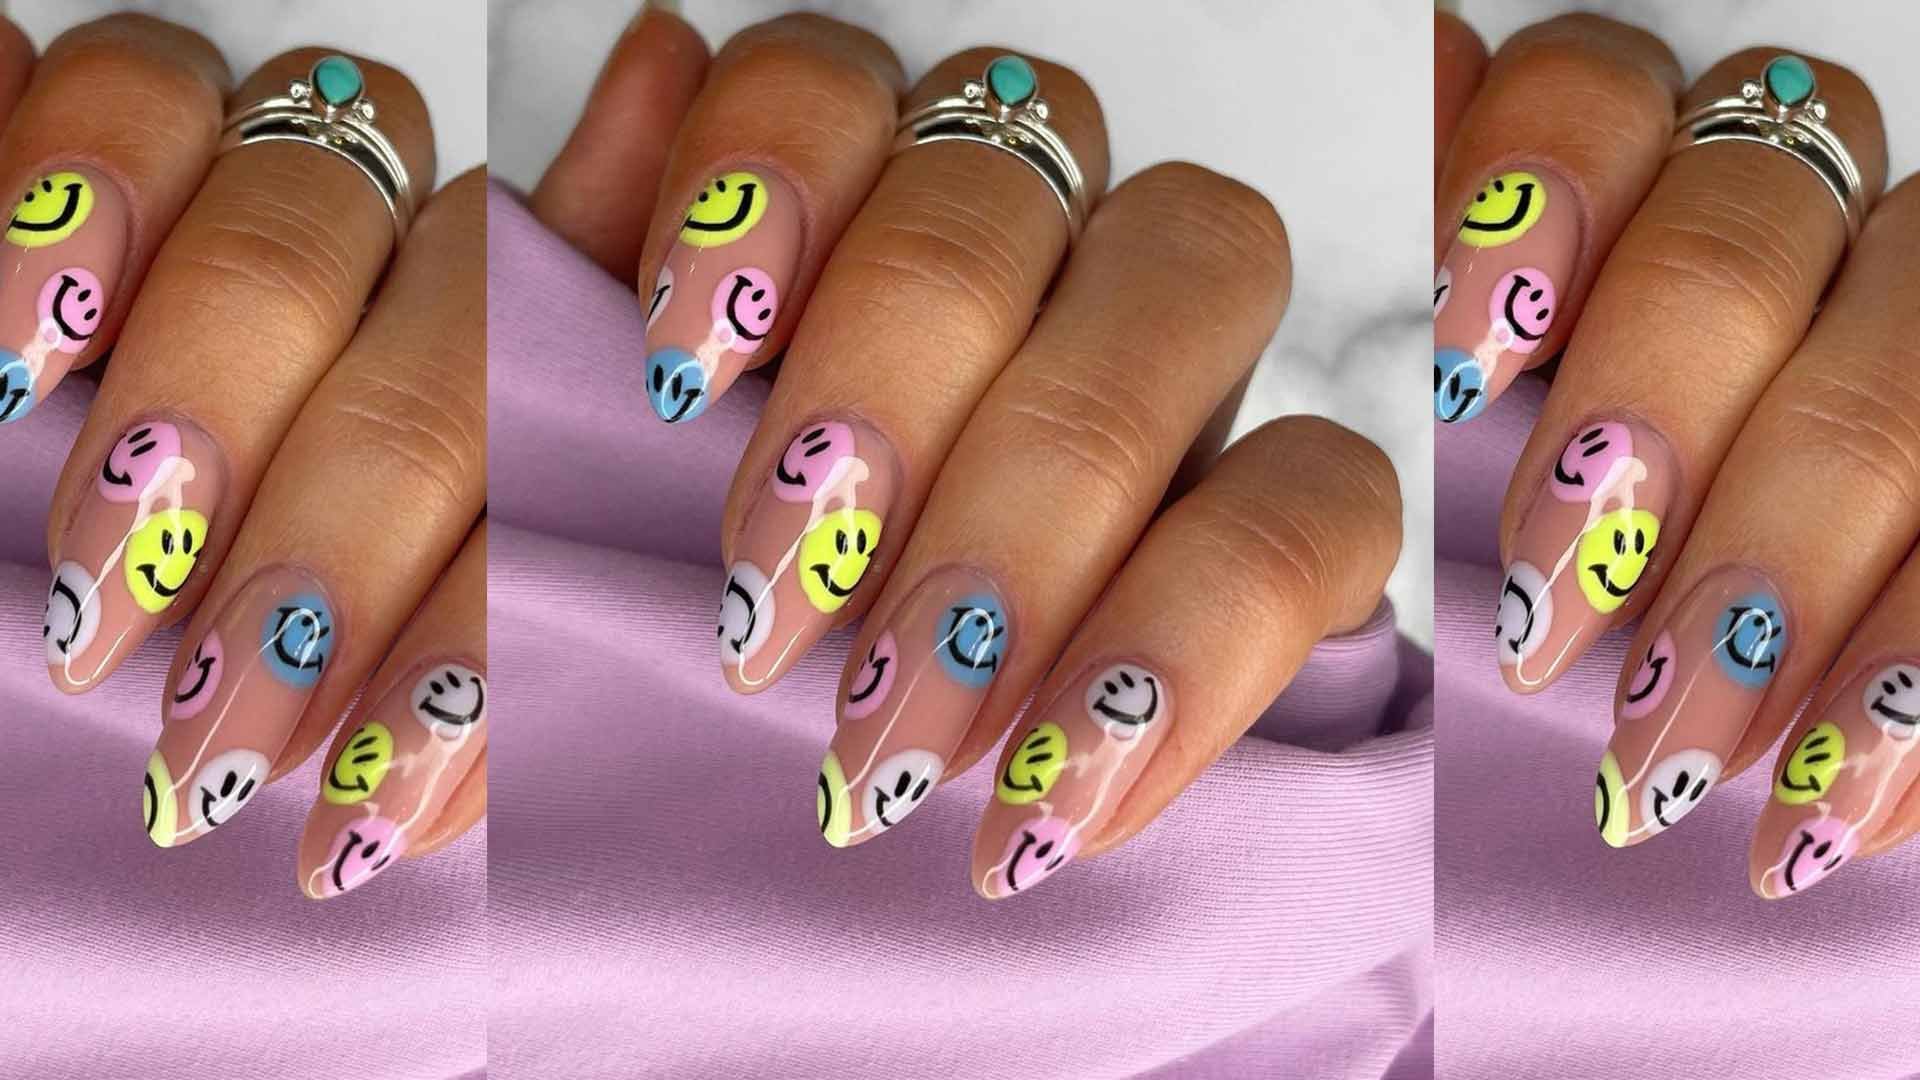 5. Smiley Face Nail Stickers - wide 9